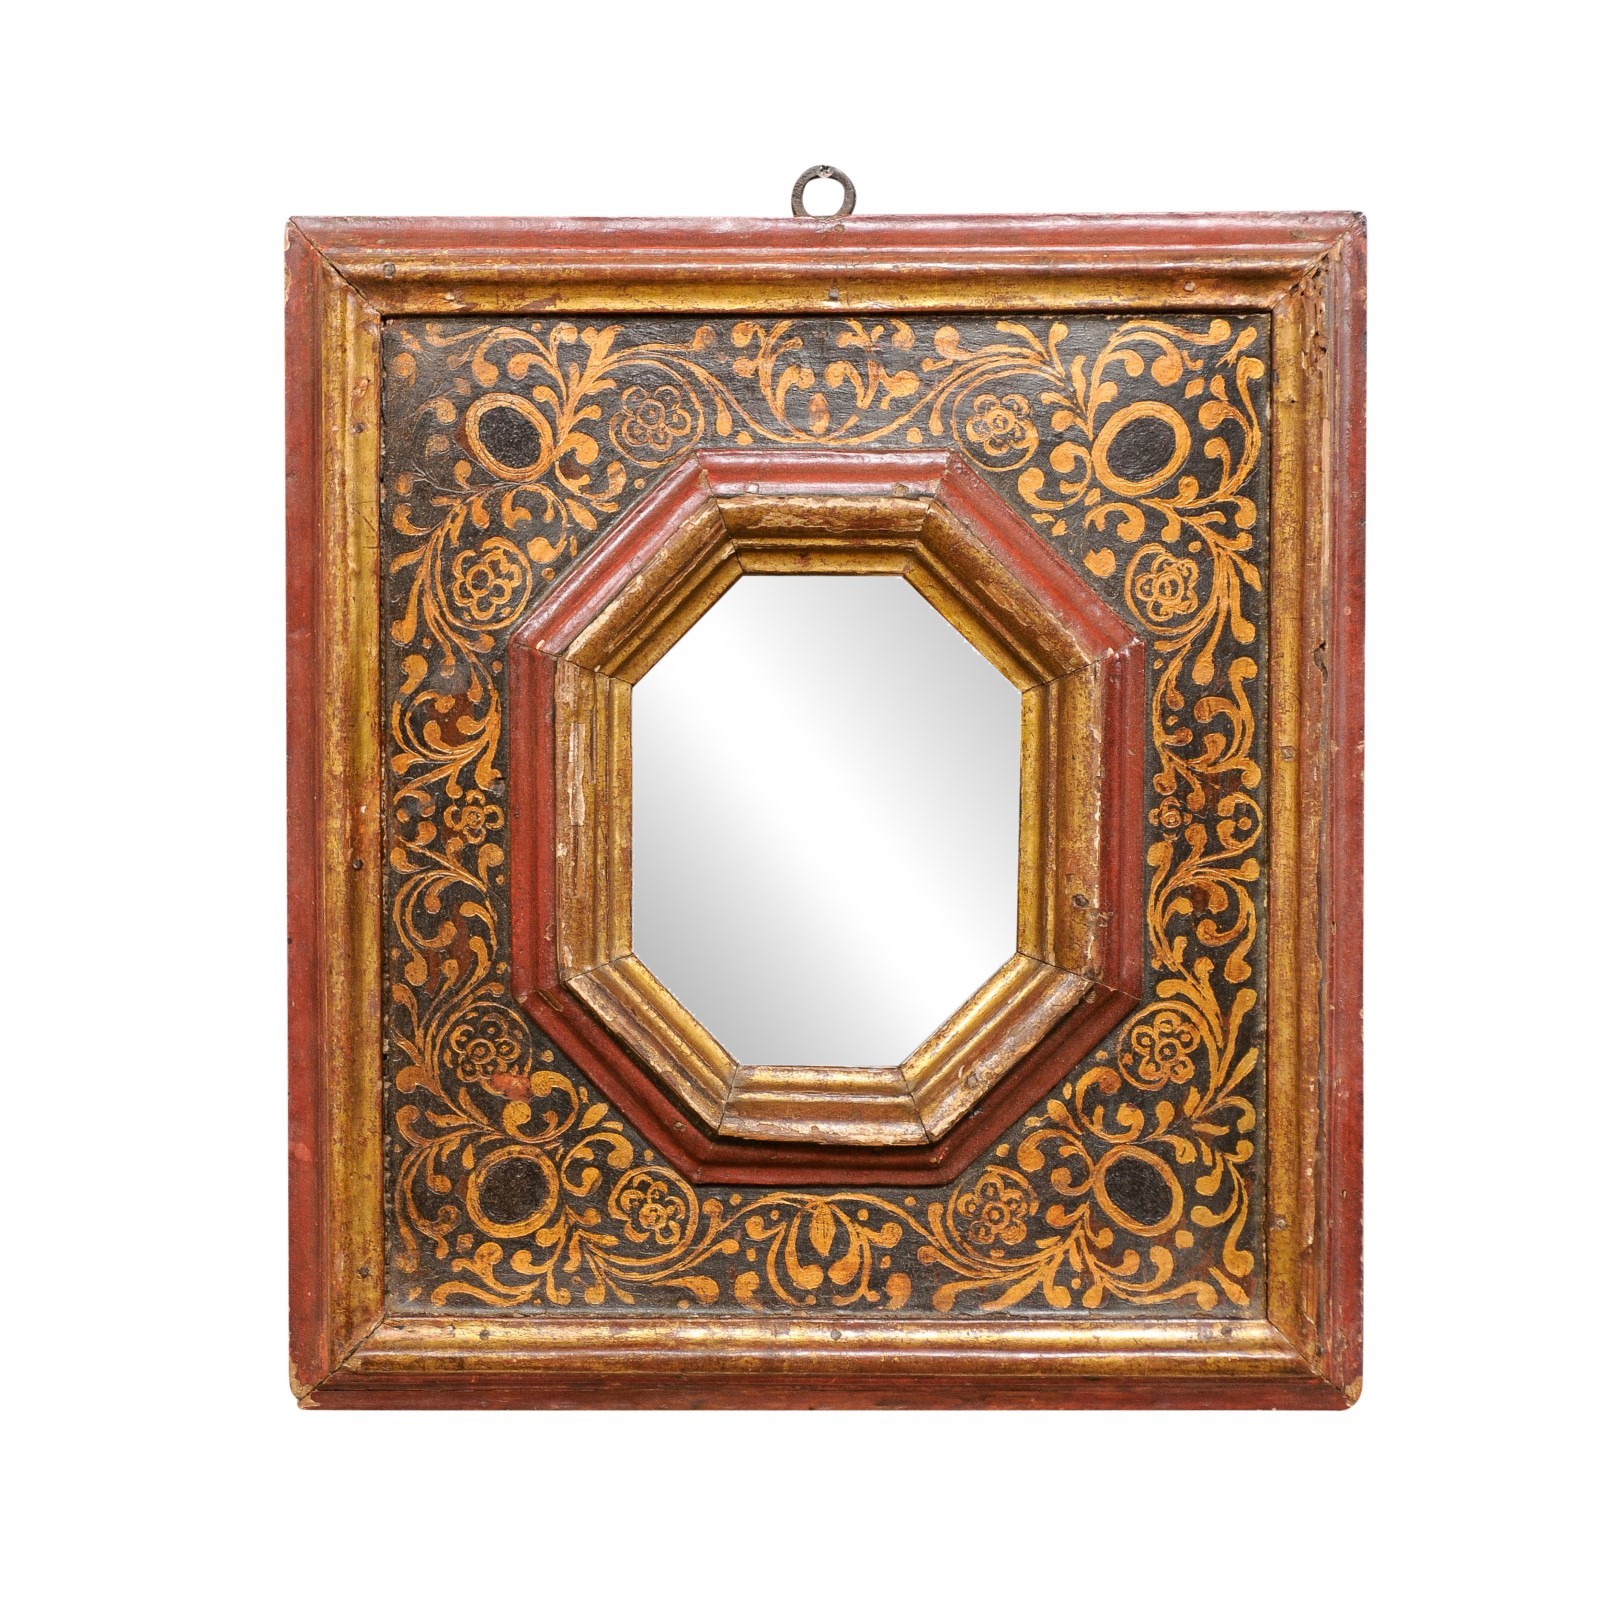 18th C. Hand-Painted Accent Mirror, Spain